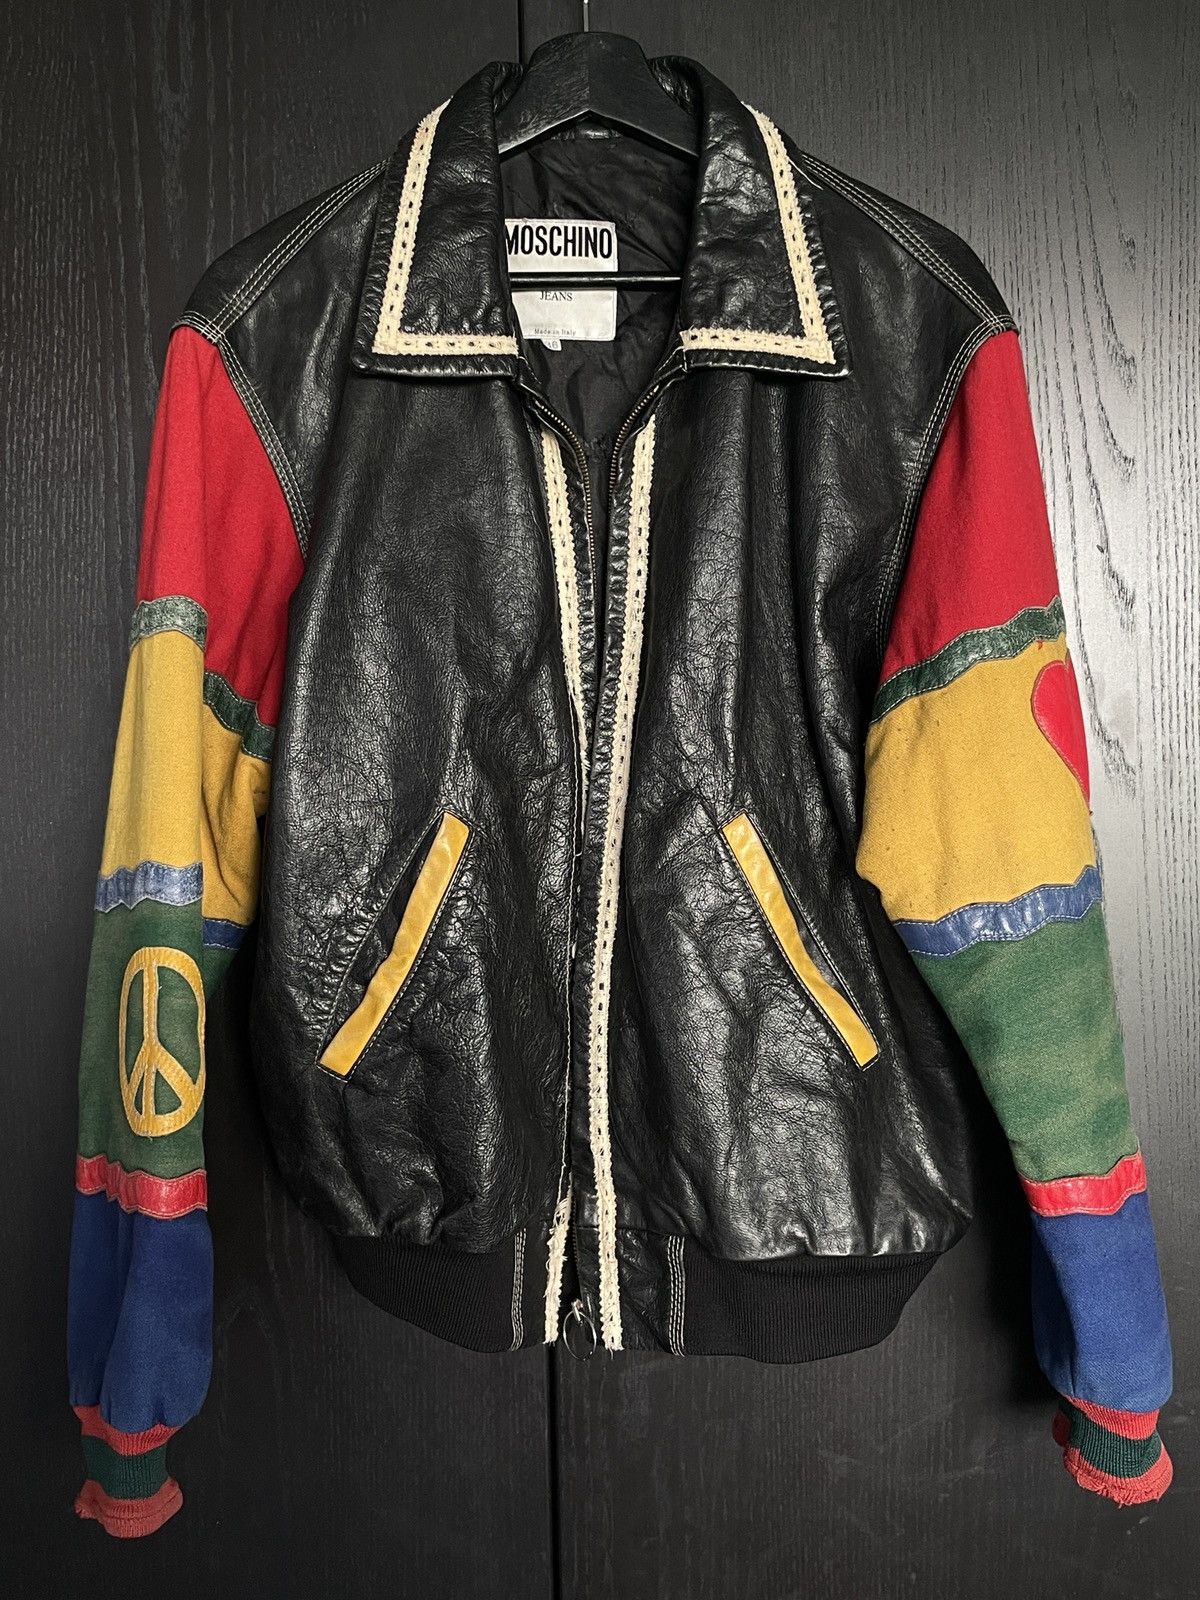 Moschino Rare Vintage 1980s Peace & Love Moschino Leather Jacket 